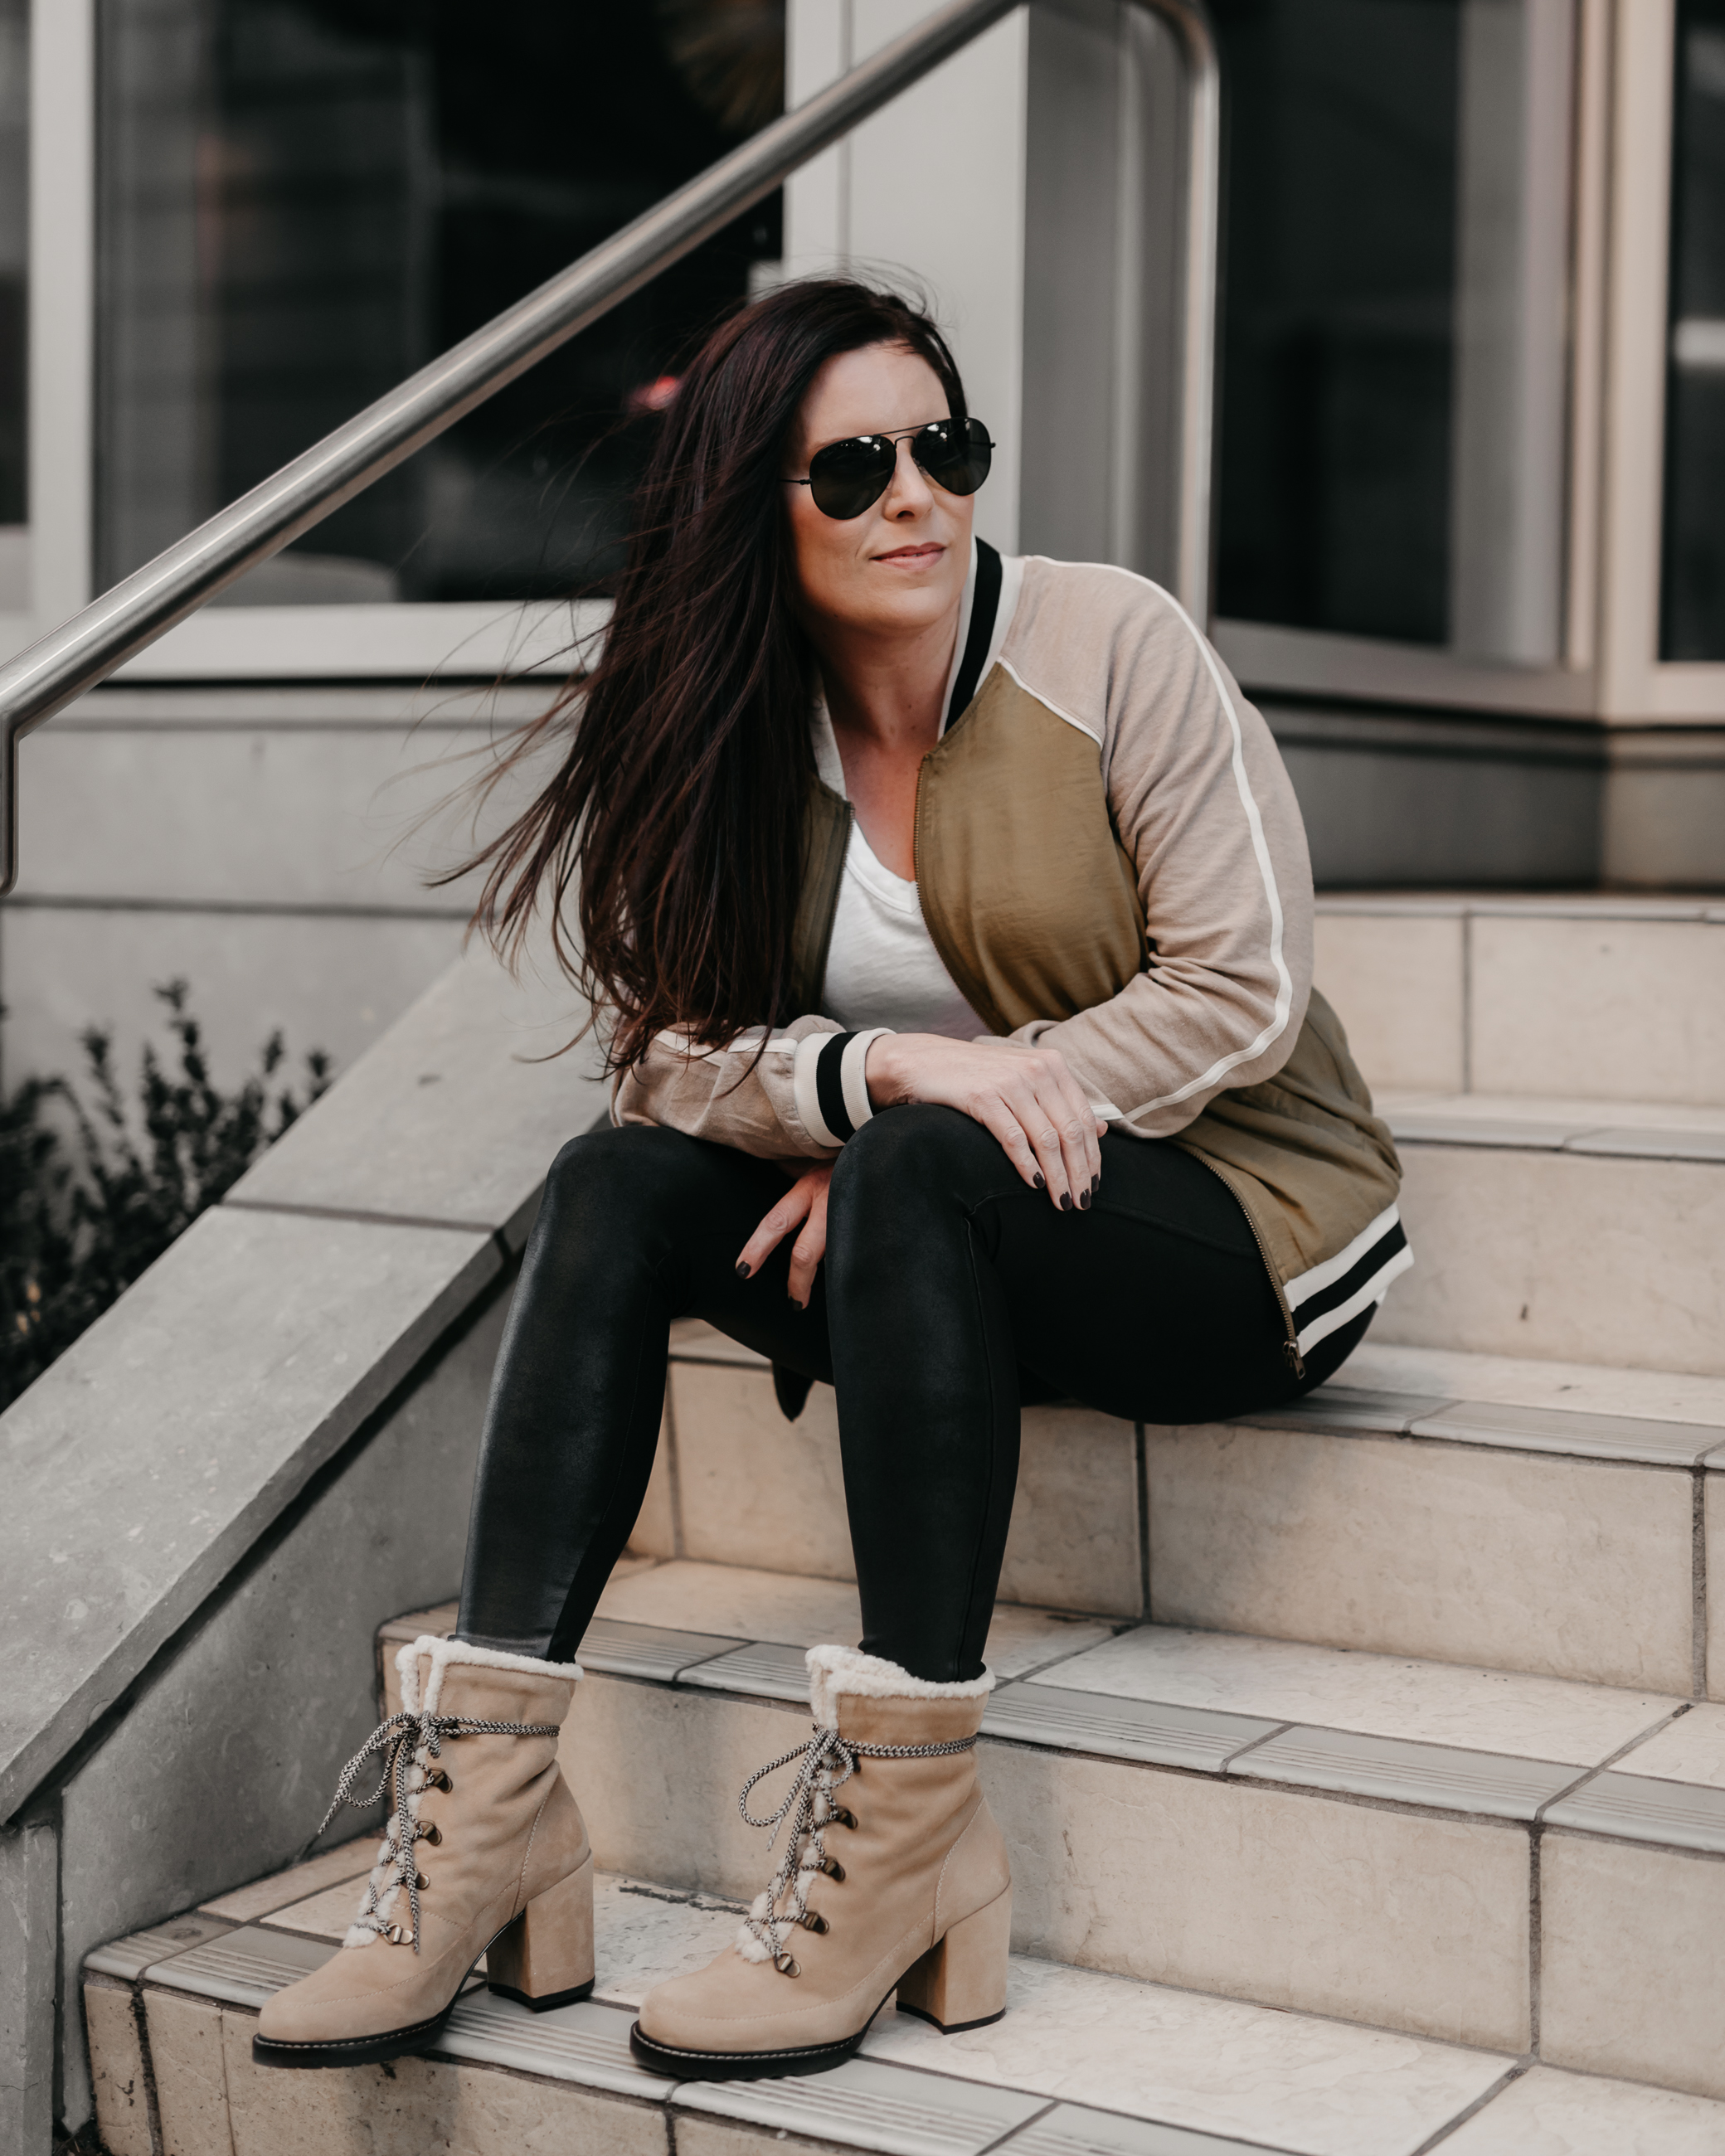 chic clean sophisticated style with bomber jacket, leggings and booties